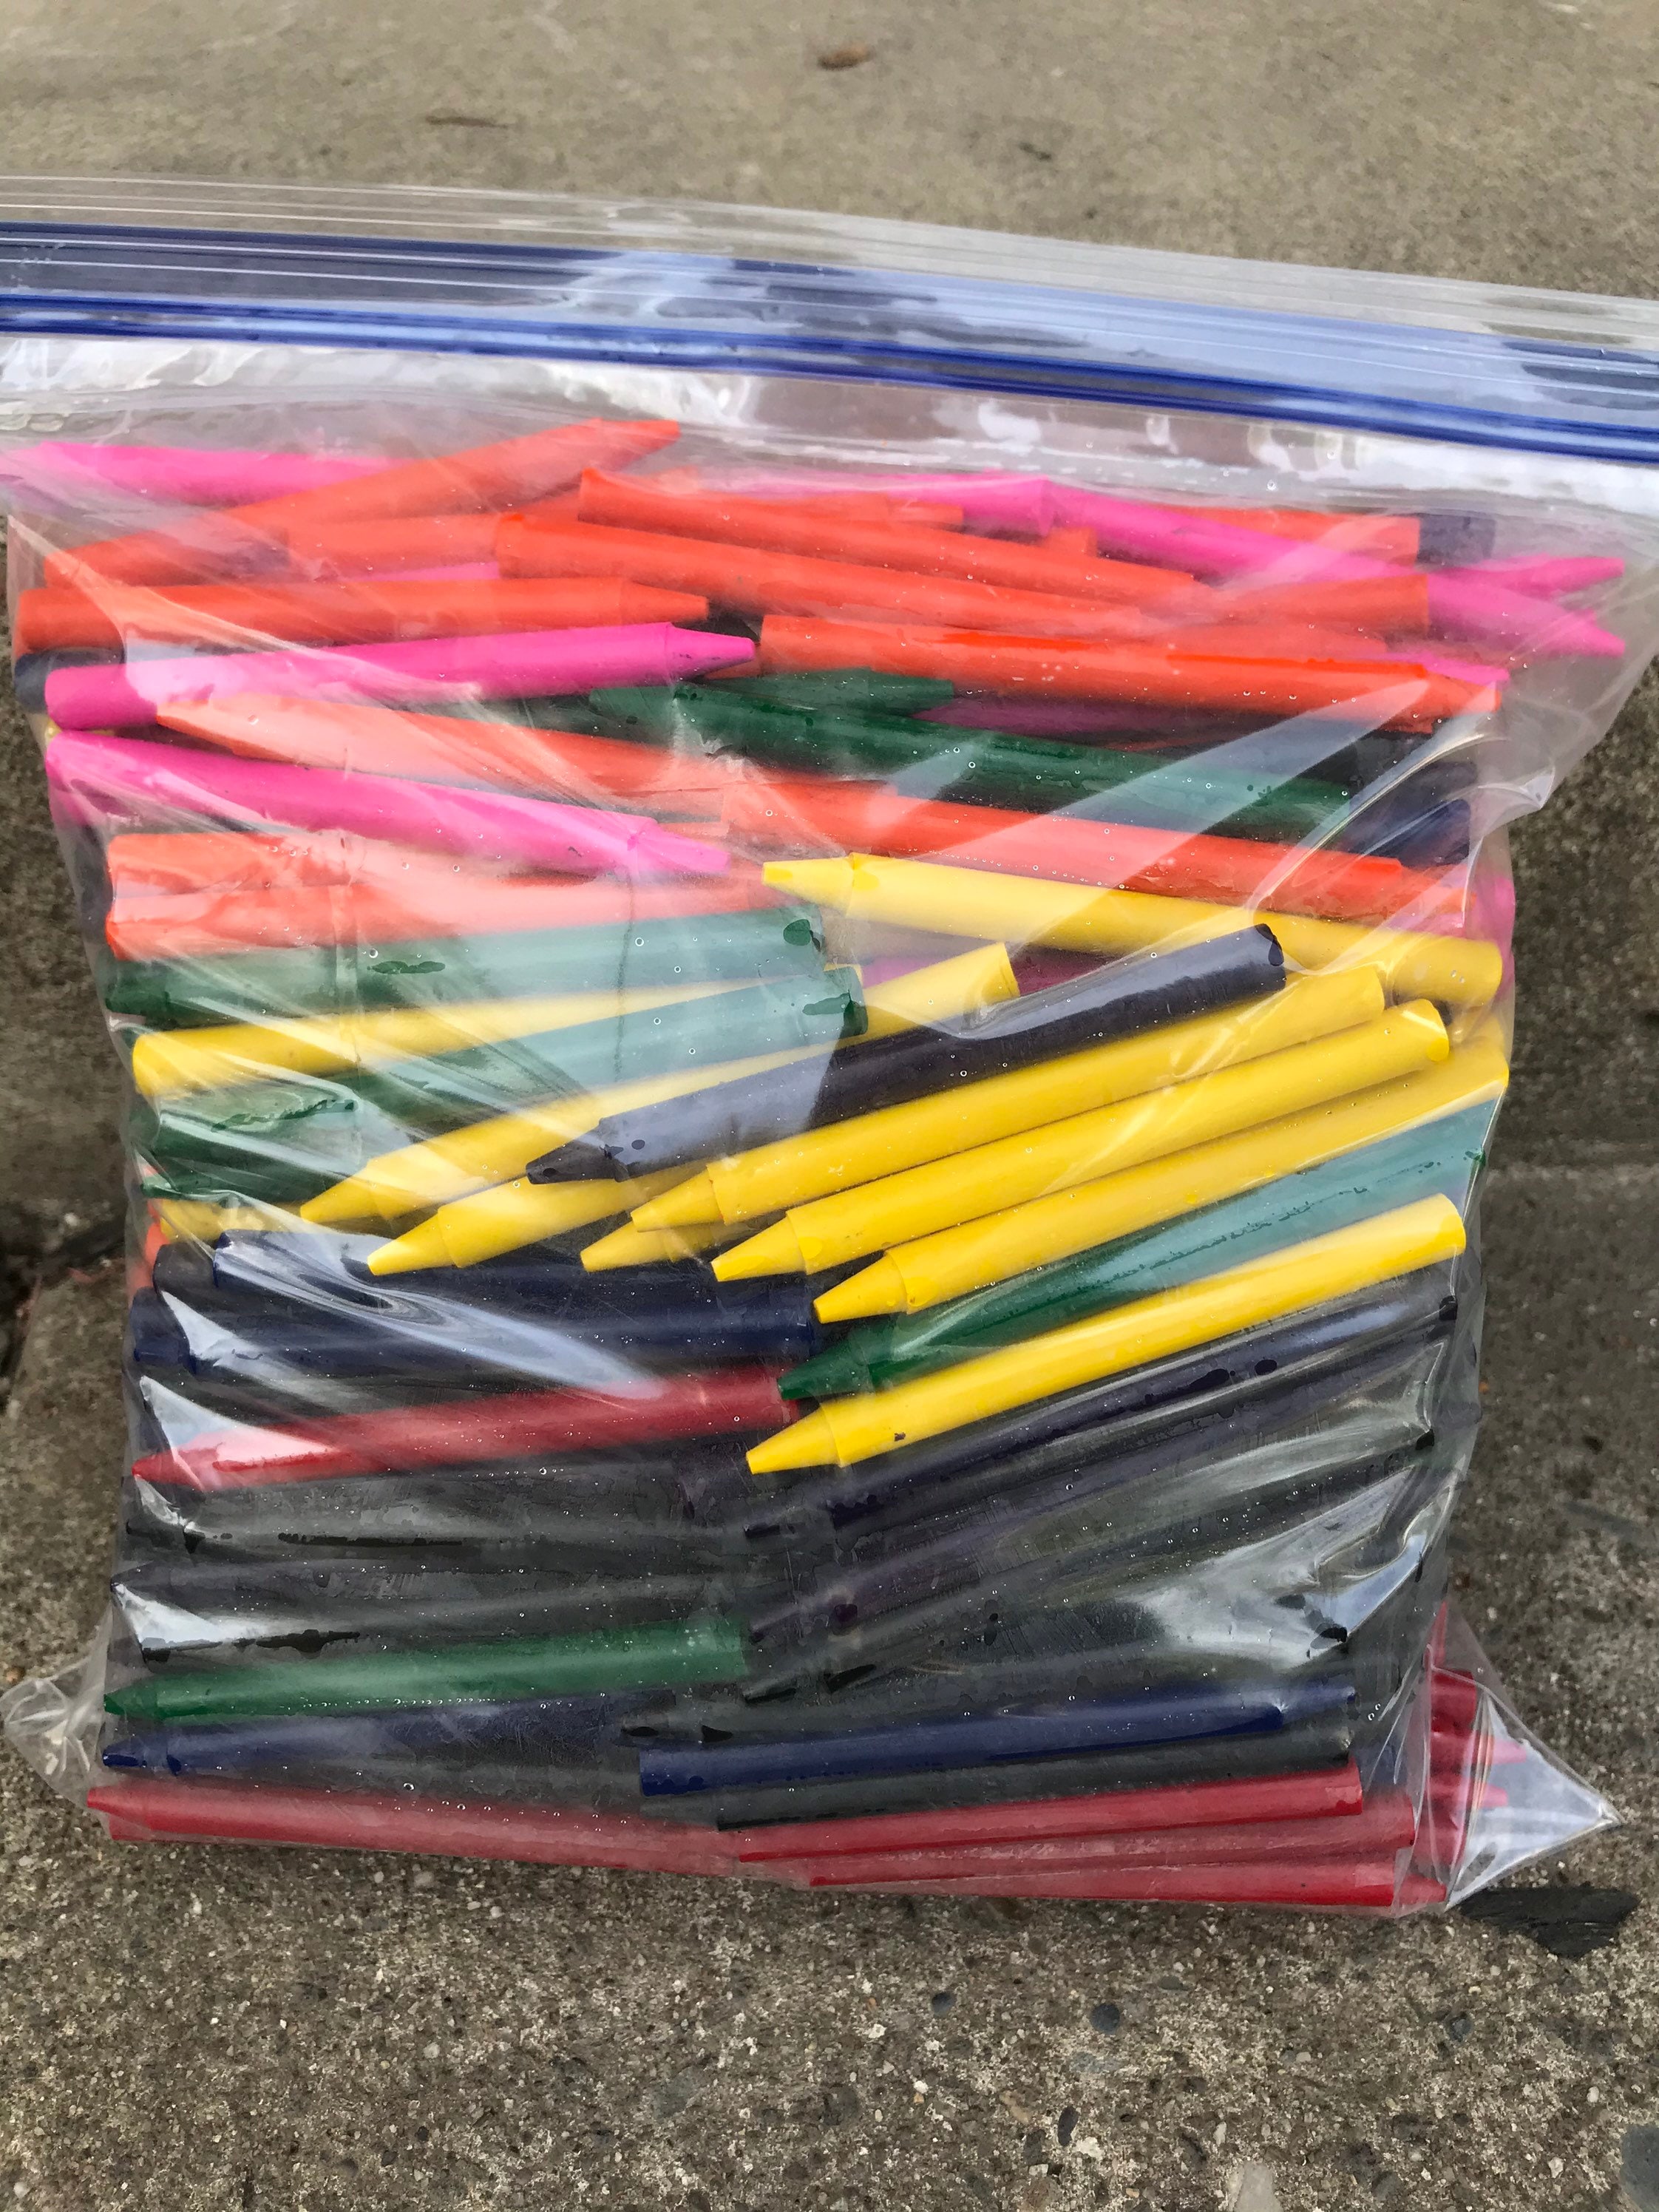 300 Colored Pencil Crayons Bulk Lot Random Preowned Crayola & Similar Mix  Get a Large Assortment of Used Art Supplies for School or Artists 